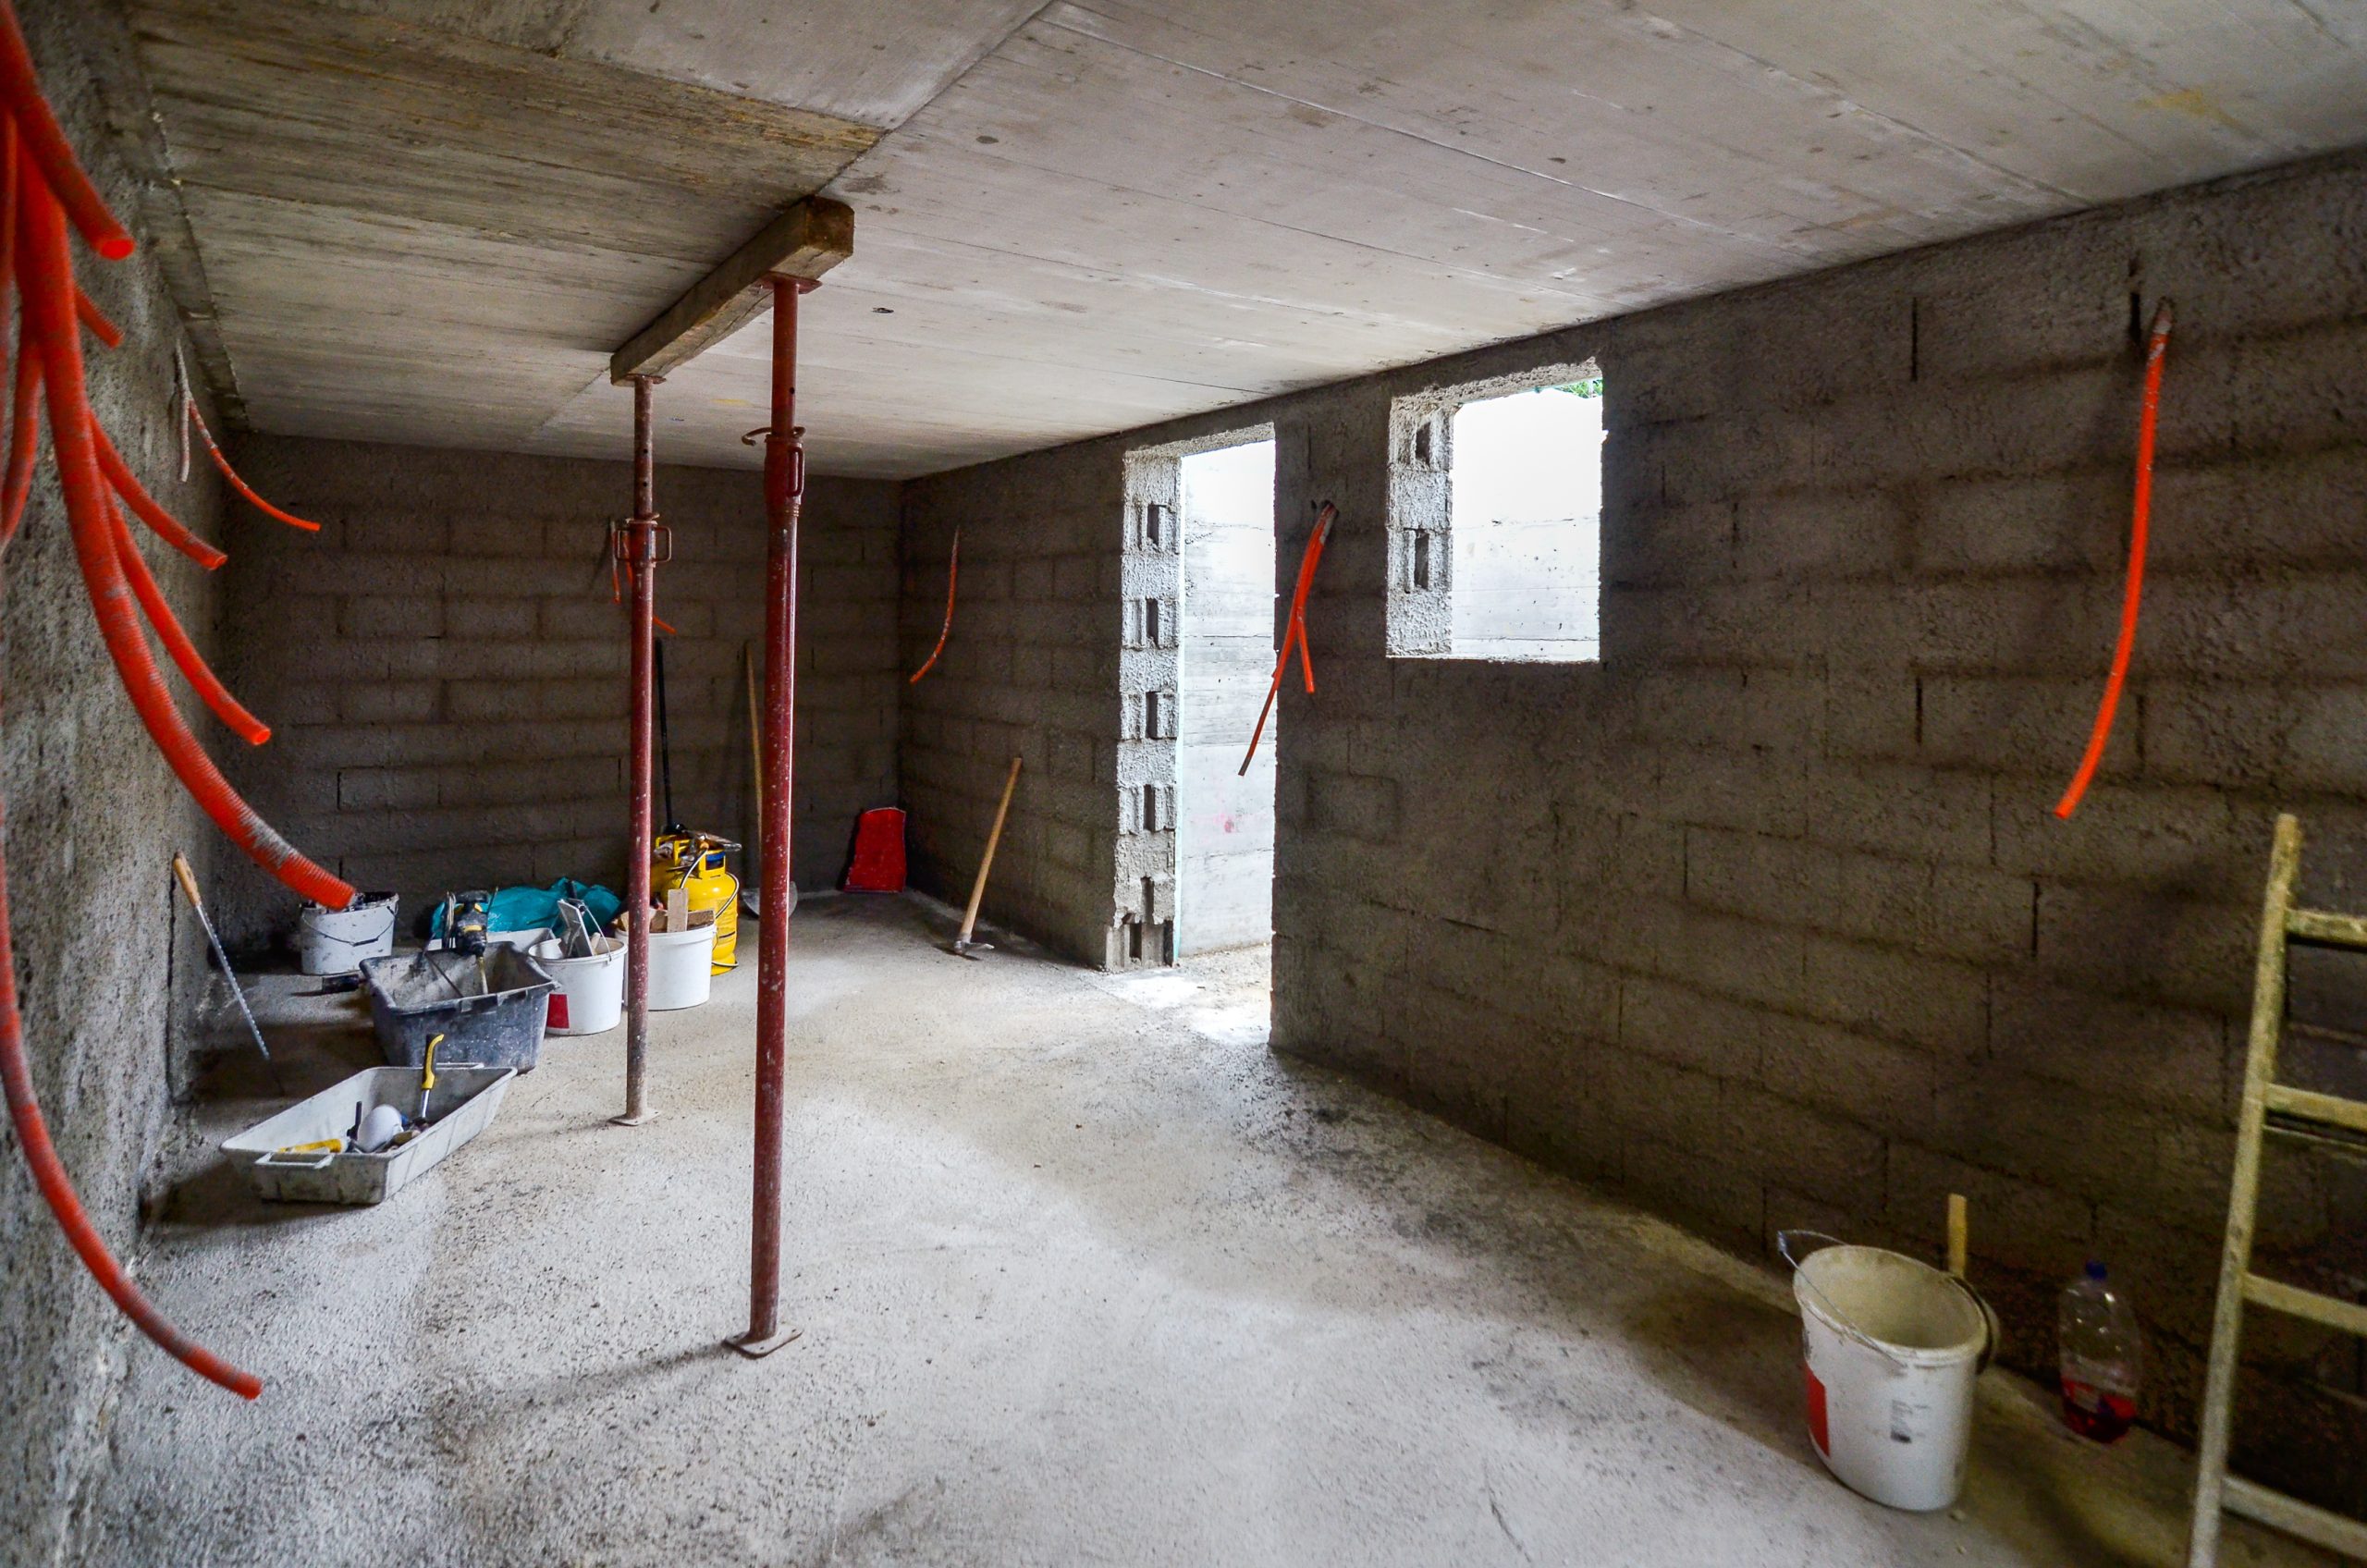 Plastering, rebuilding, waterproofing basement or a cellar and w